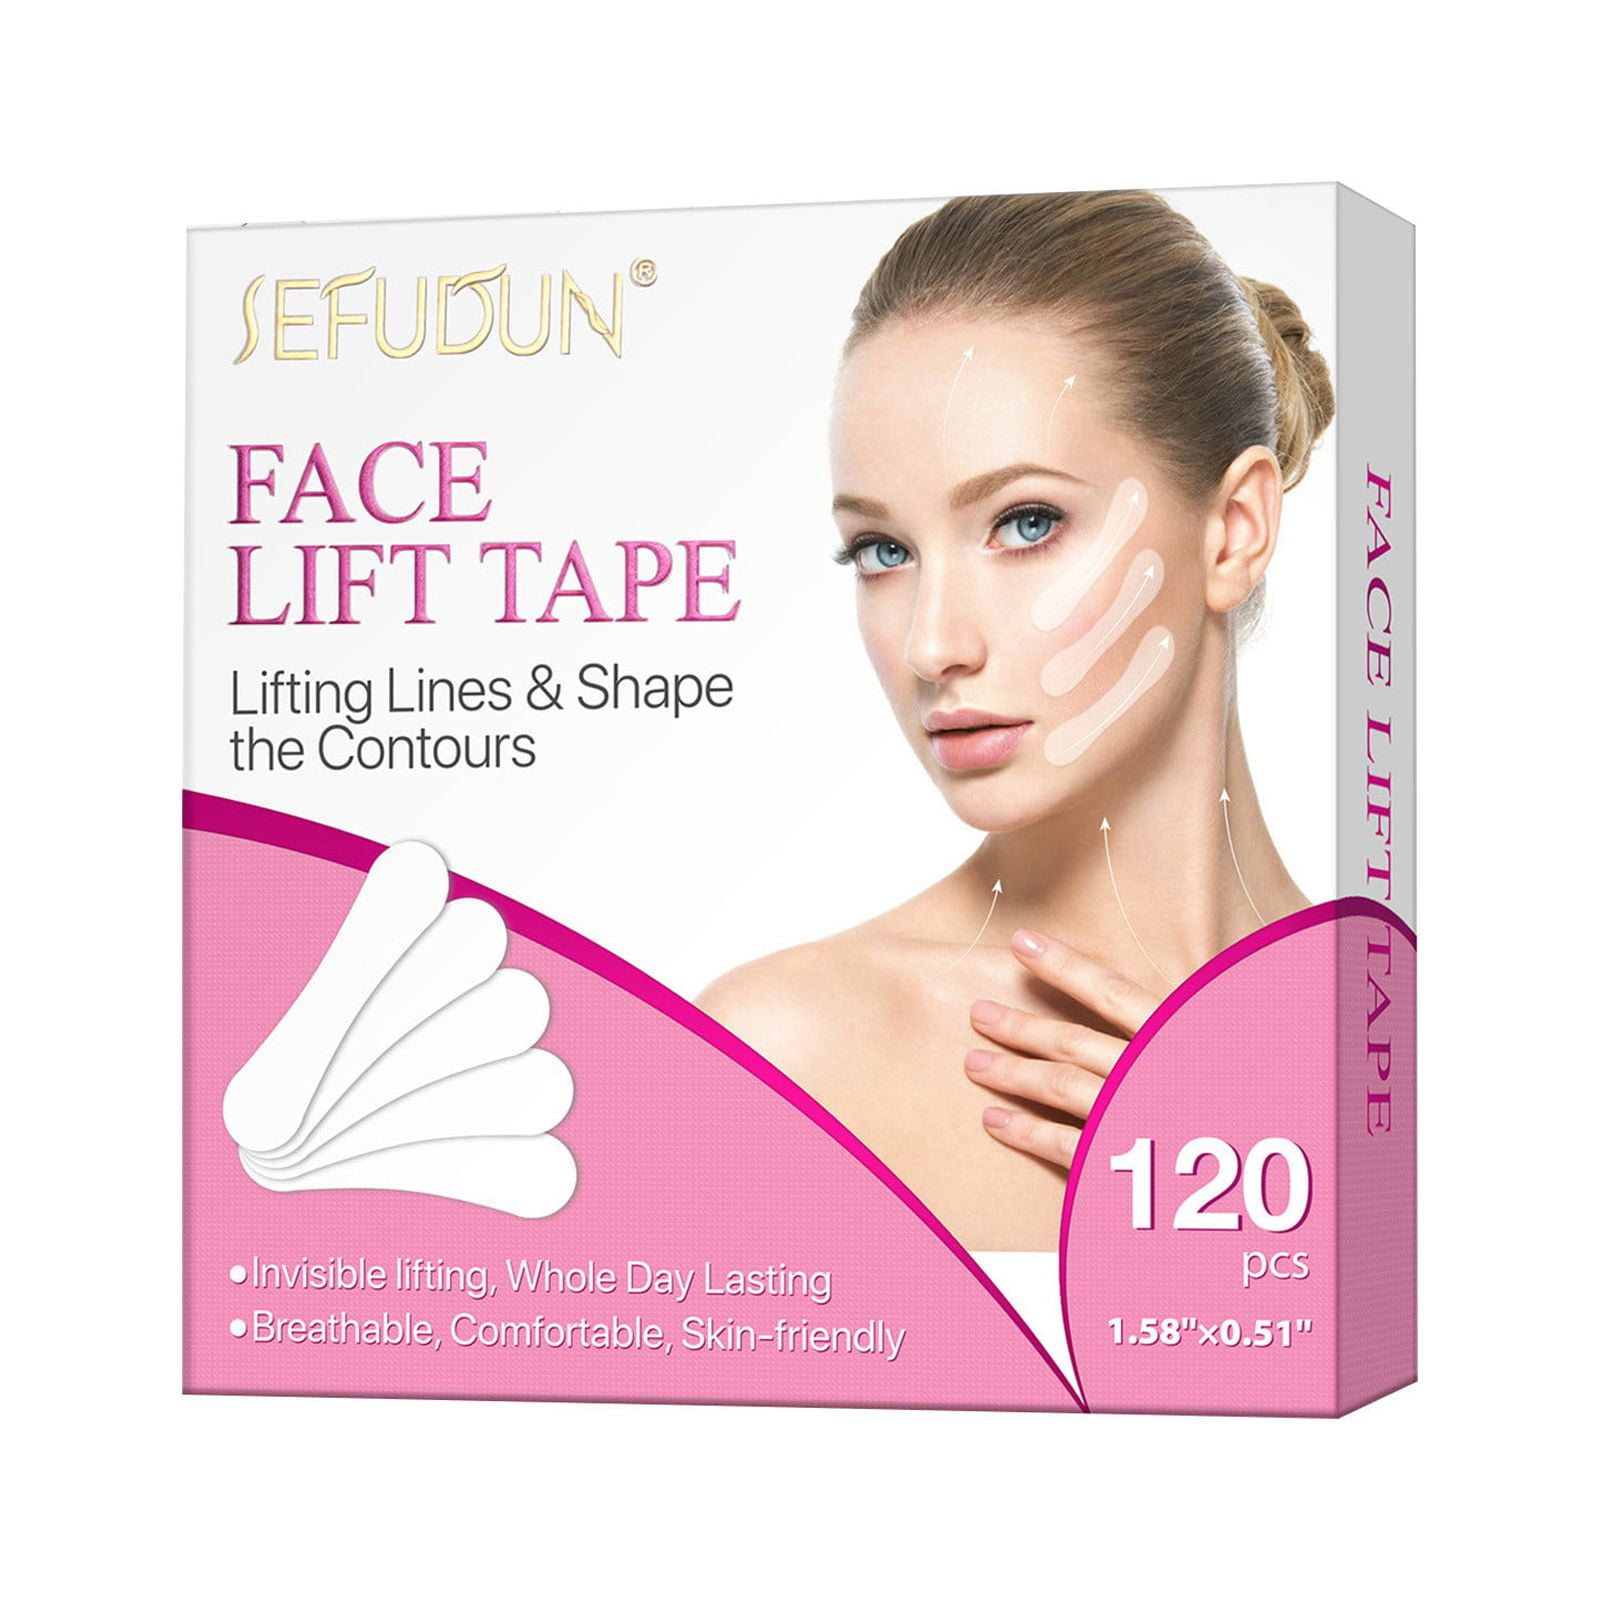 Lingouzi Face Lift Tape, Face Tape Lifting Invisible Waterproof, Makeup  Neck Tape Instant Face Eye Lift Facelift Tape For Jowls Double Chin,1.58''x0.51'',120PCS,Small  